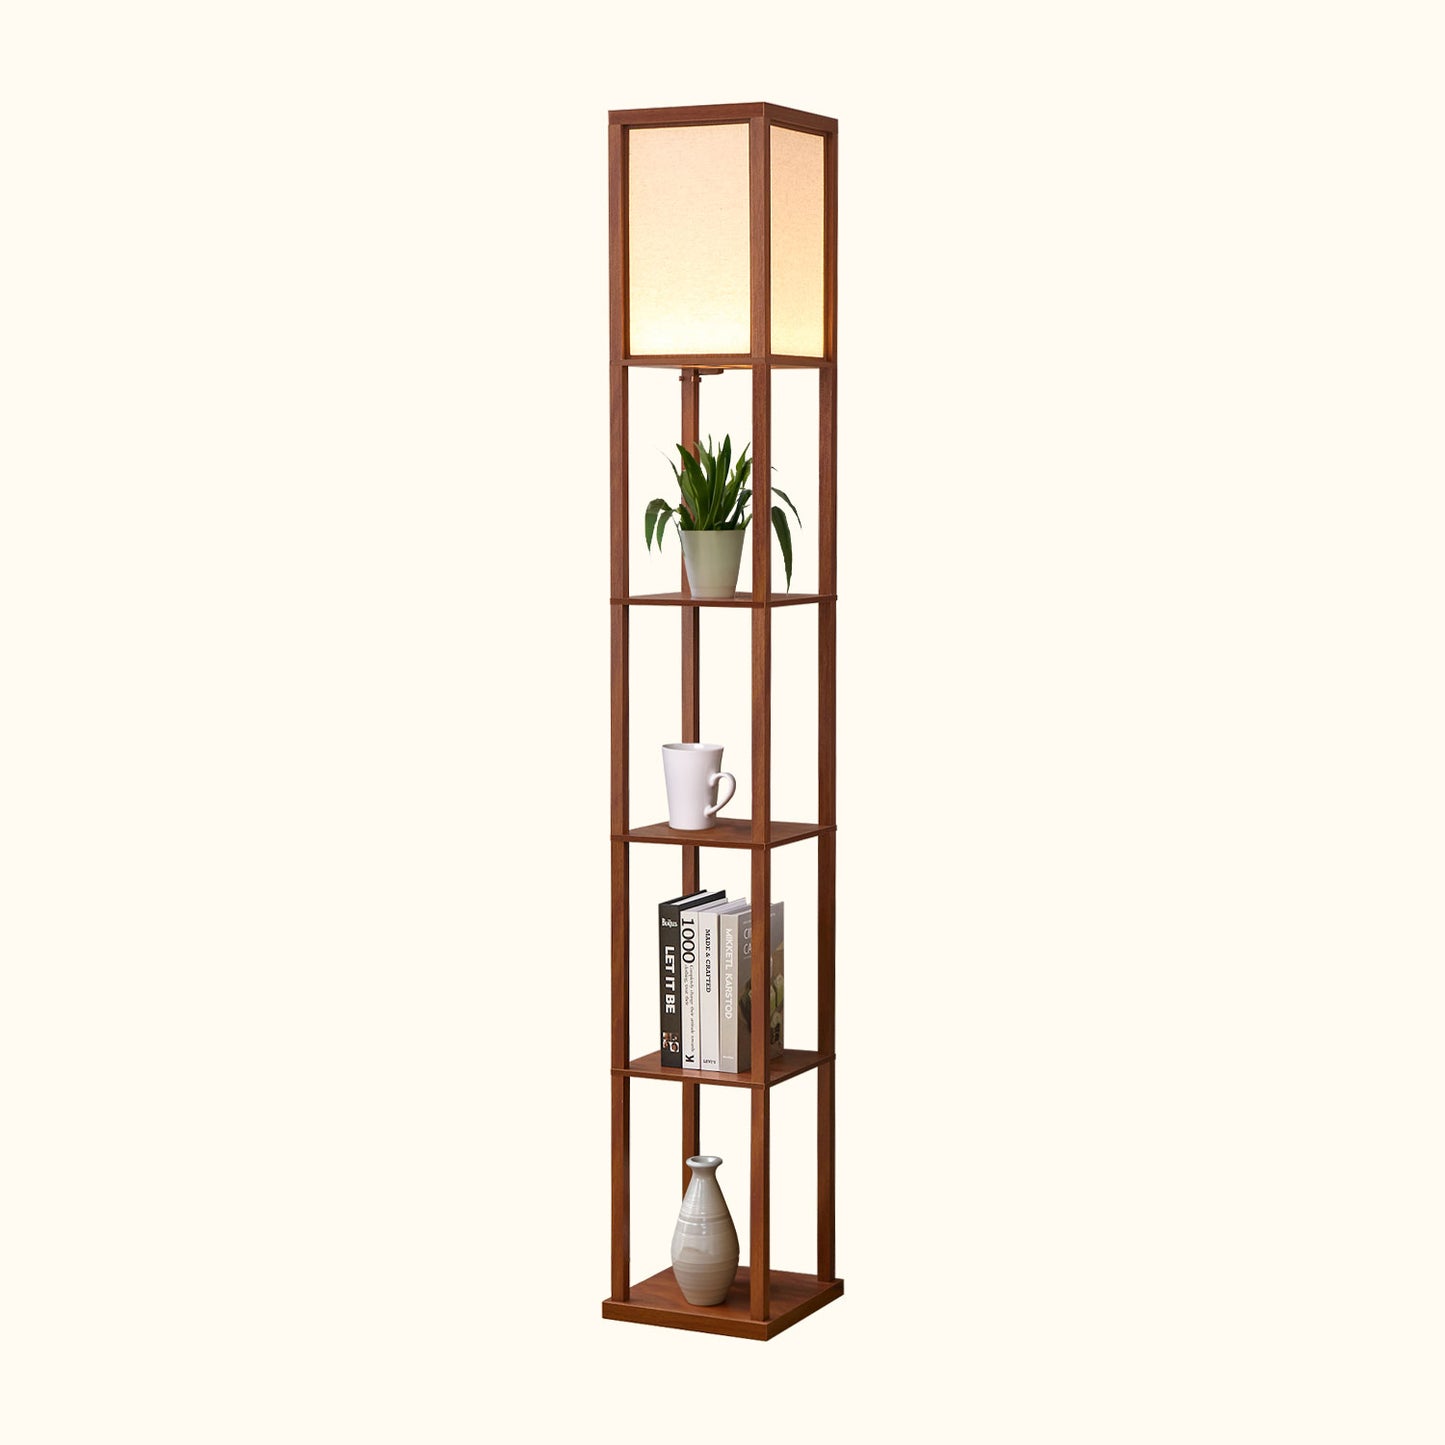 Alvin Floor Lamp With Shelves with Dimmable Integrated LED Lighting